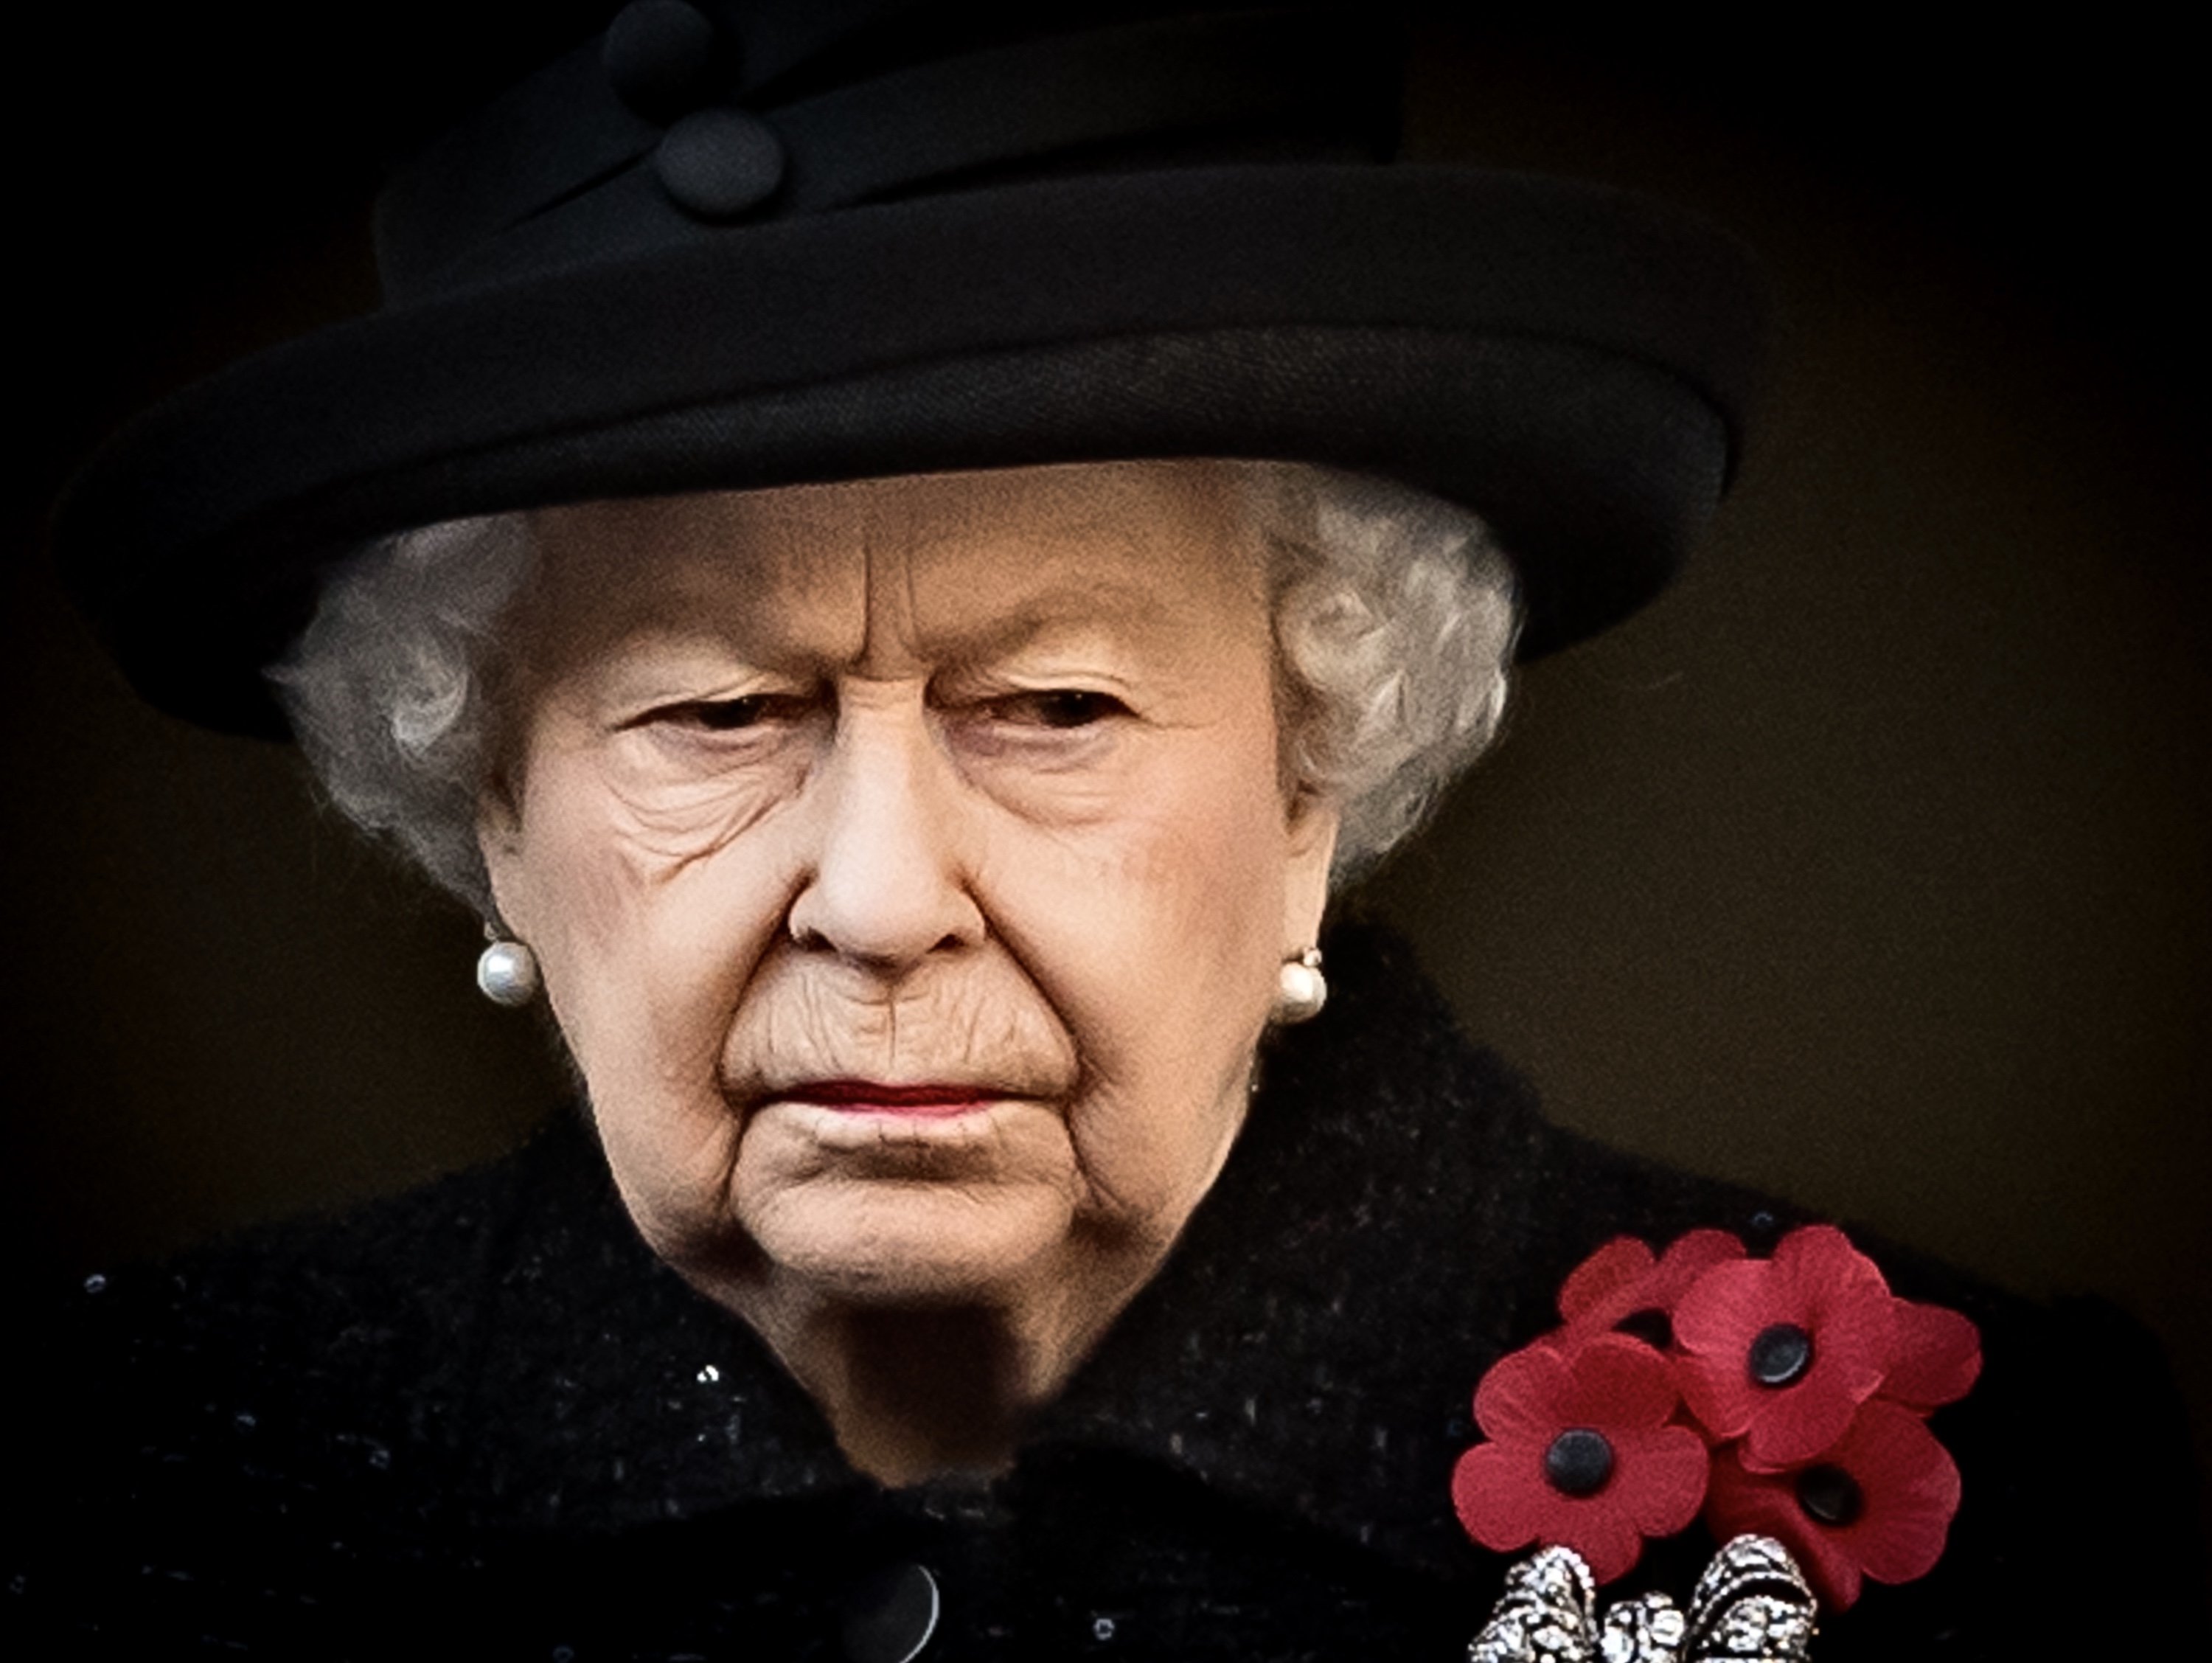 Queen Elizabeth II attends the annual Remembrance Sunday memorial at The Cenotaph on November 10, 2019 in London, England. | Source: Getty Images